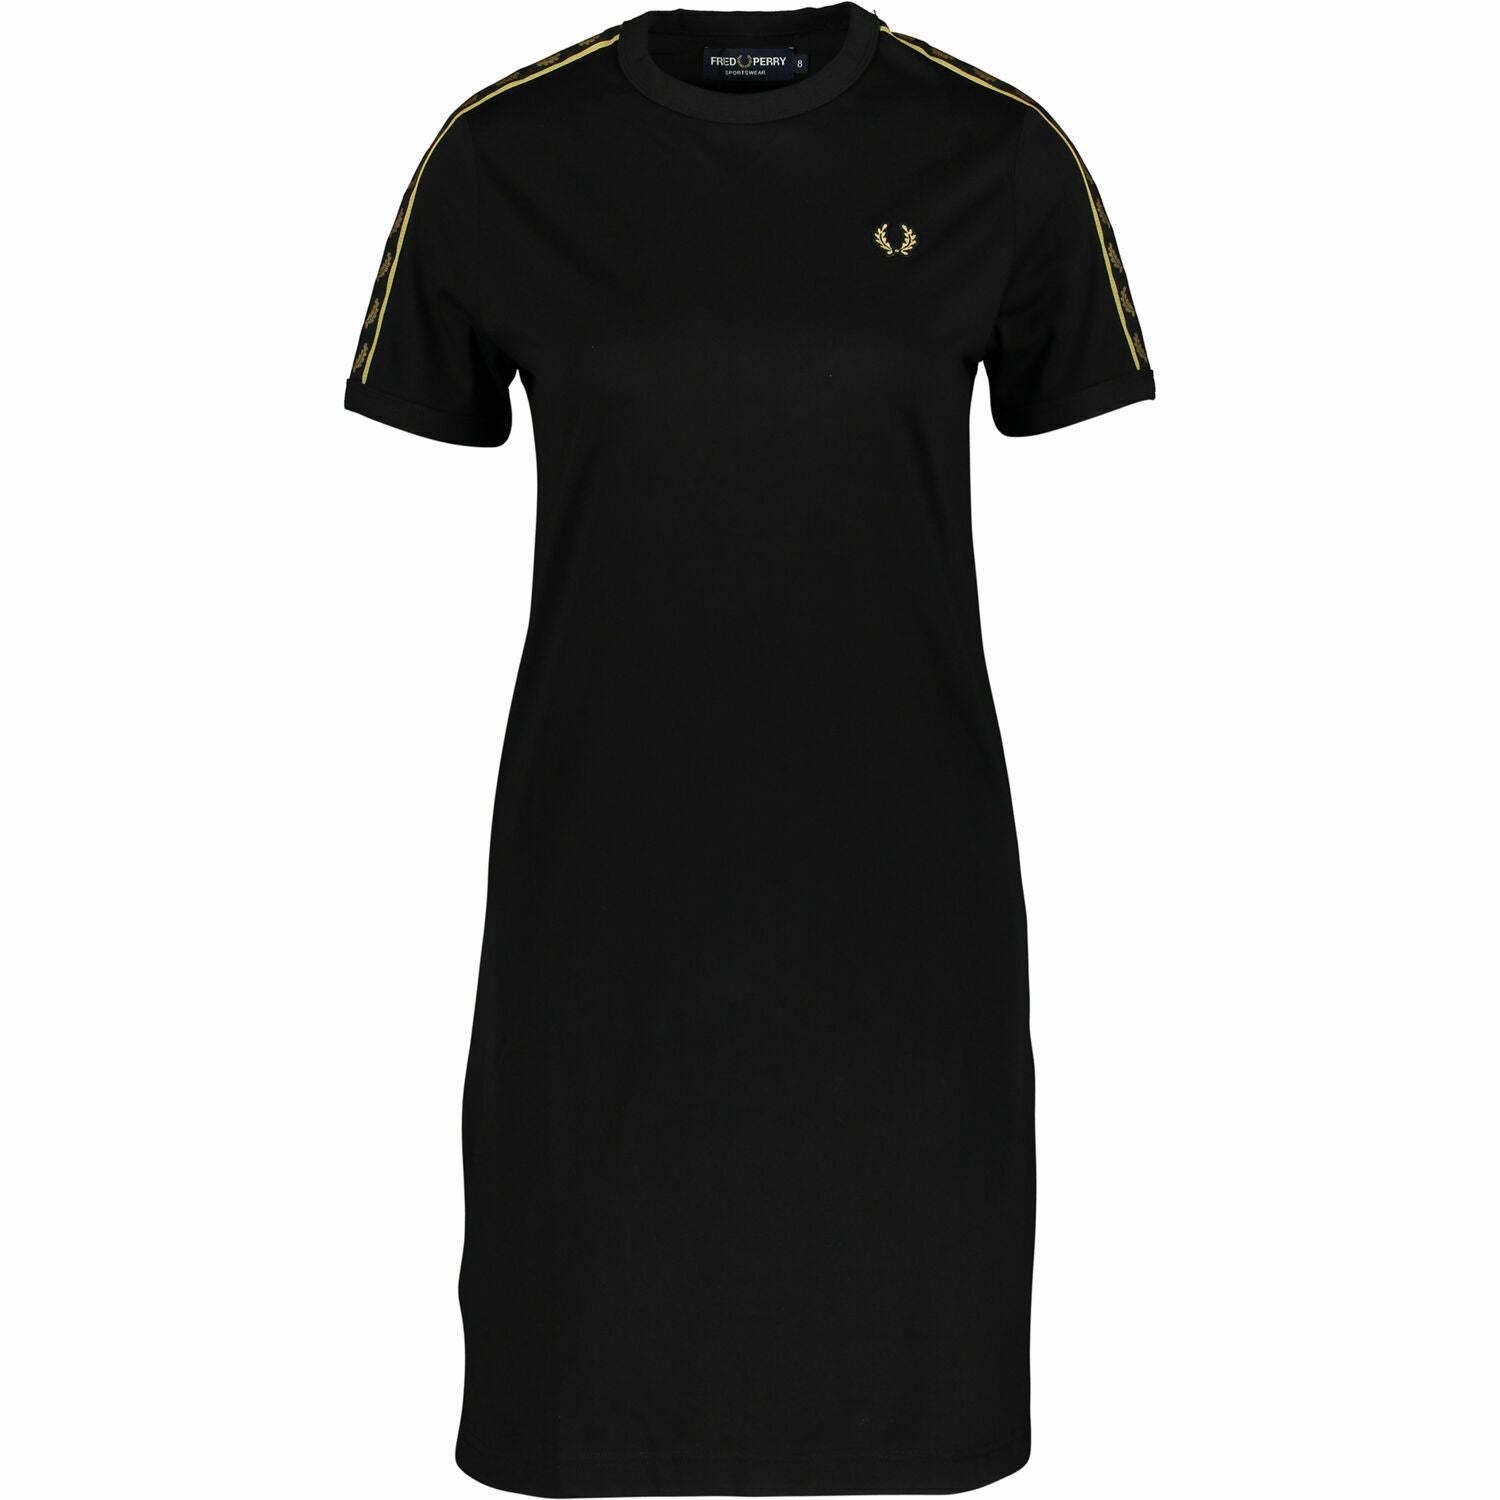 FRED PERRY Women's Taped Ringer T-shirt Dress, Black - size UK 10